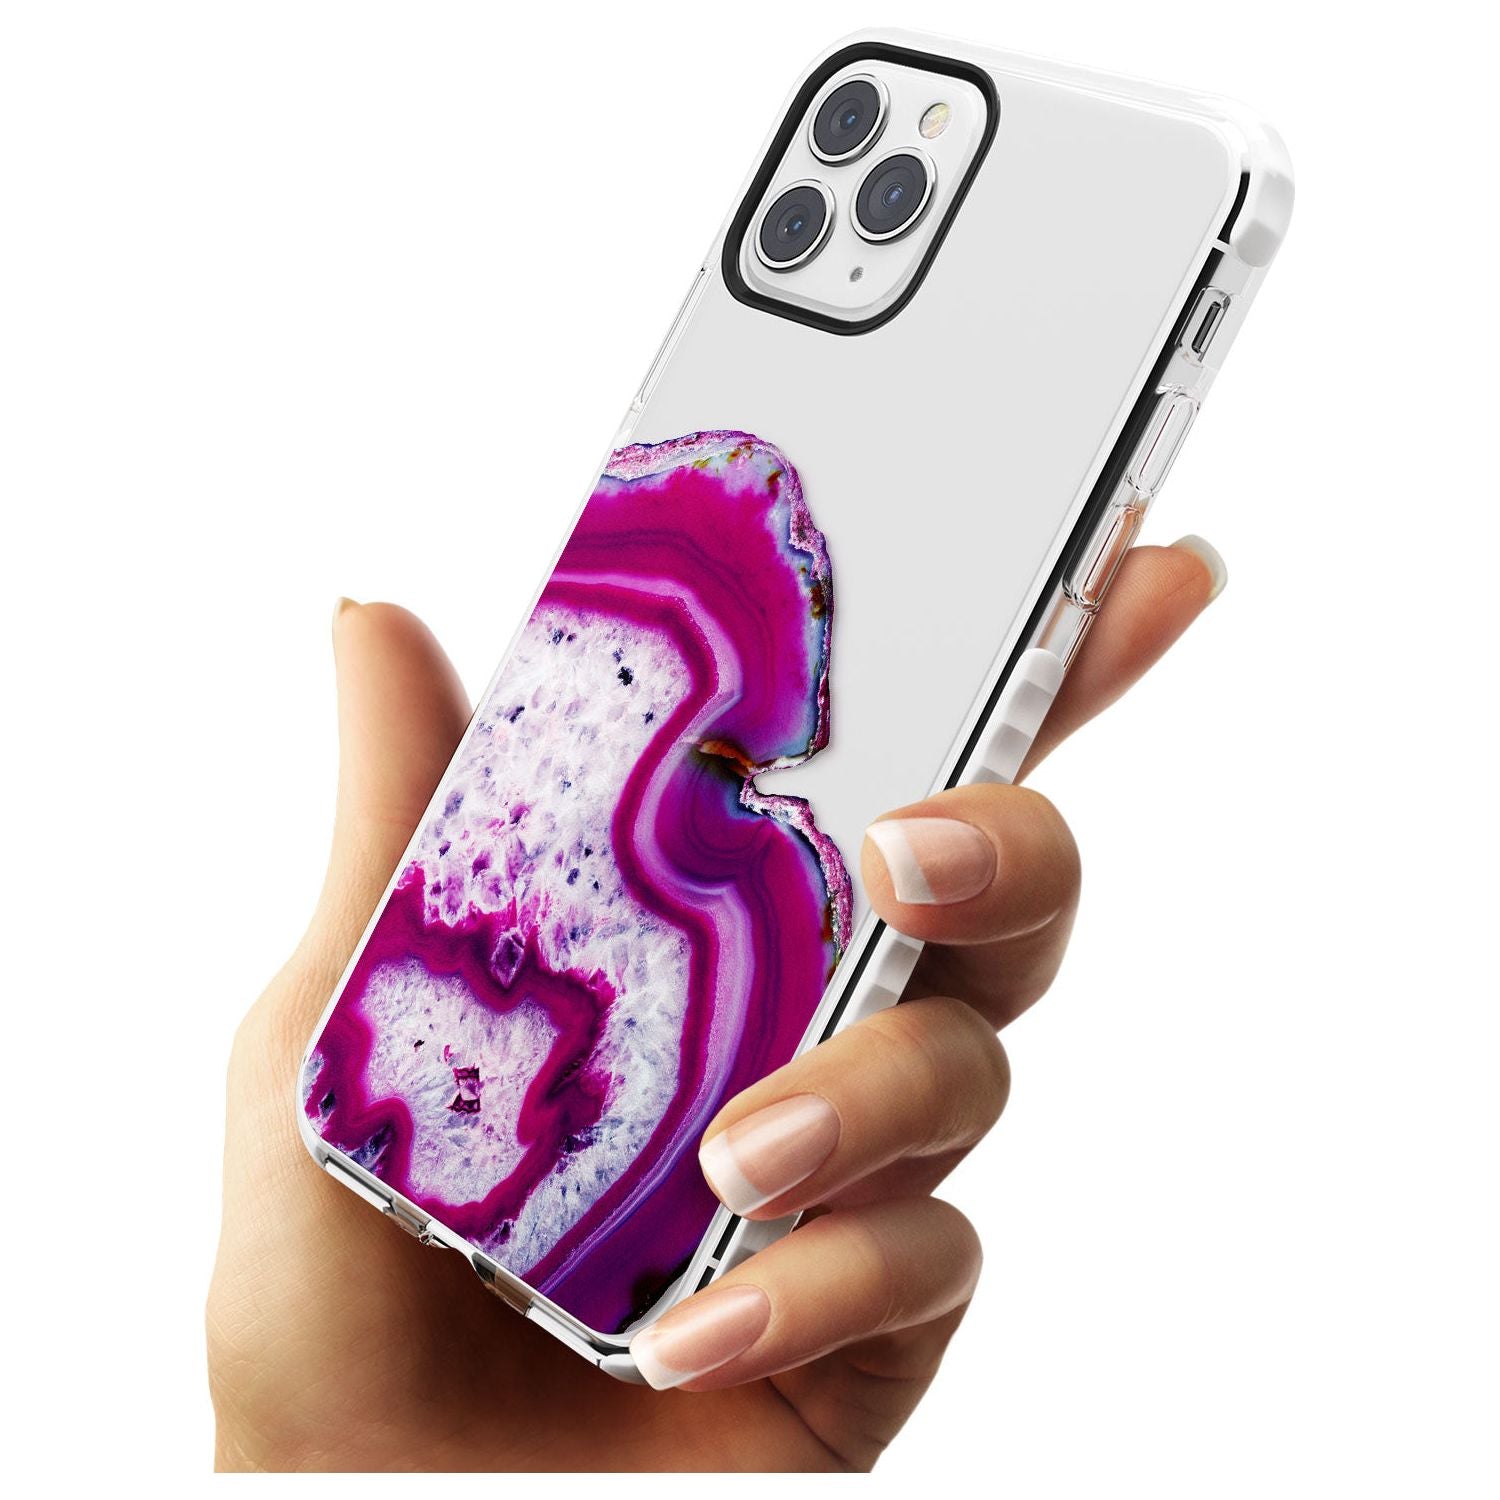 Violet & White Swirl Agate Crystal Clear Design Impact Phone Case for iPhone 11 Pro Max